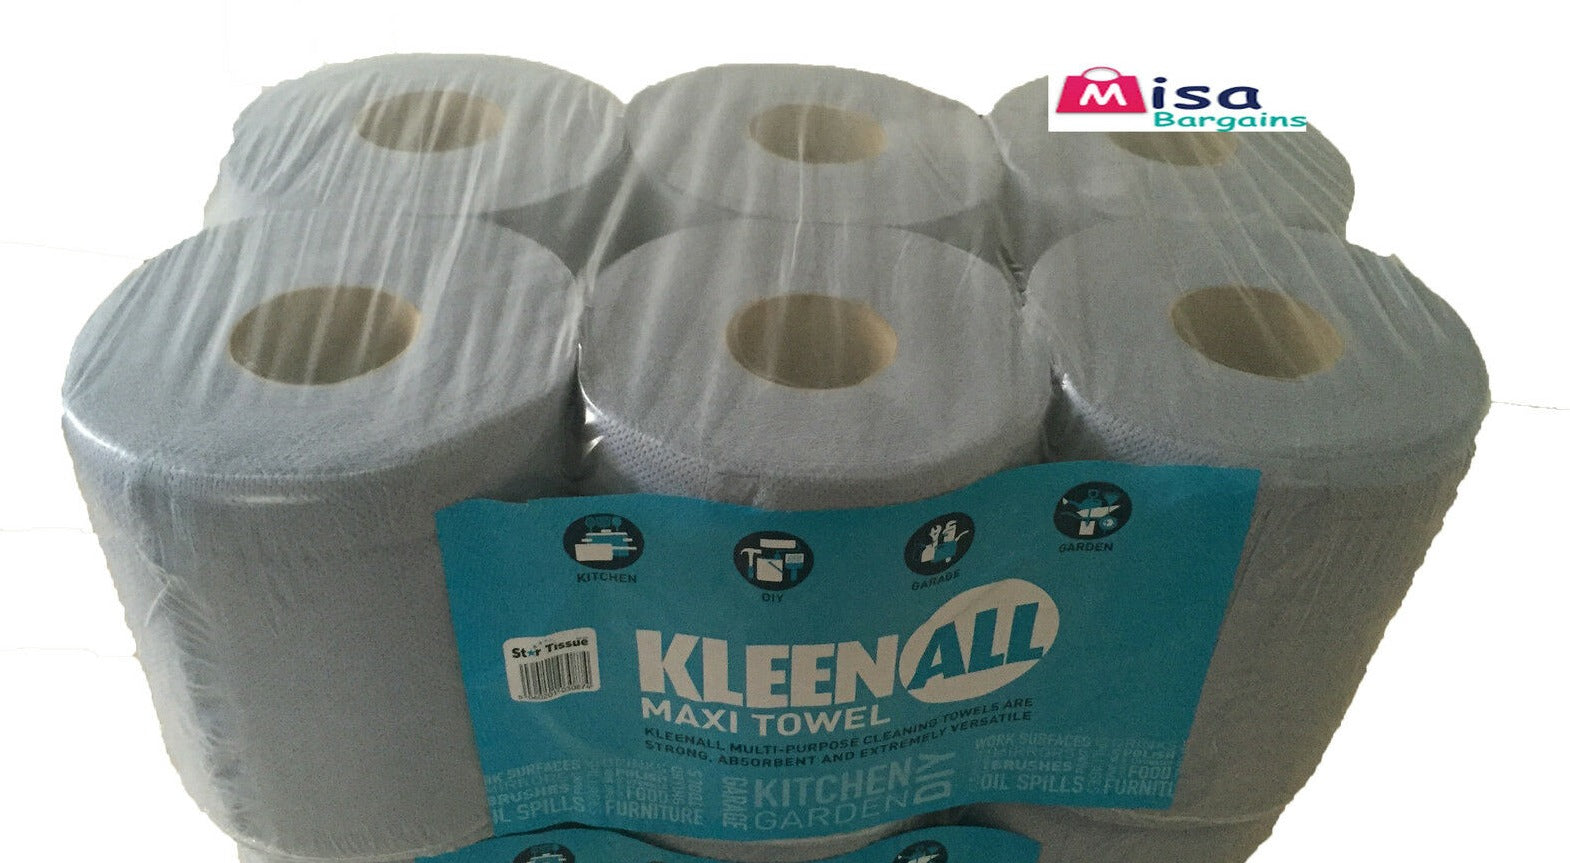 6 x Blue Centre feed Rolls 2ply Wiper Paper Towel Kitchen Roll 2 ply Tissue